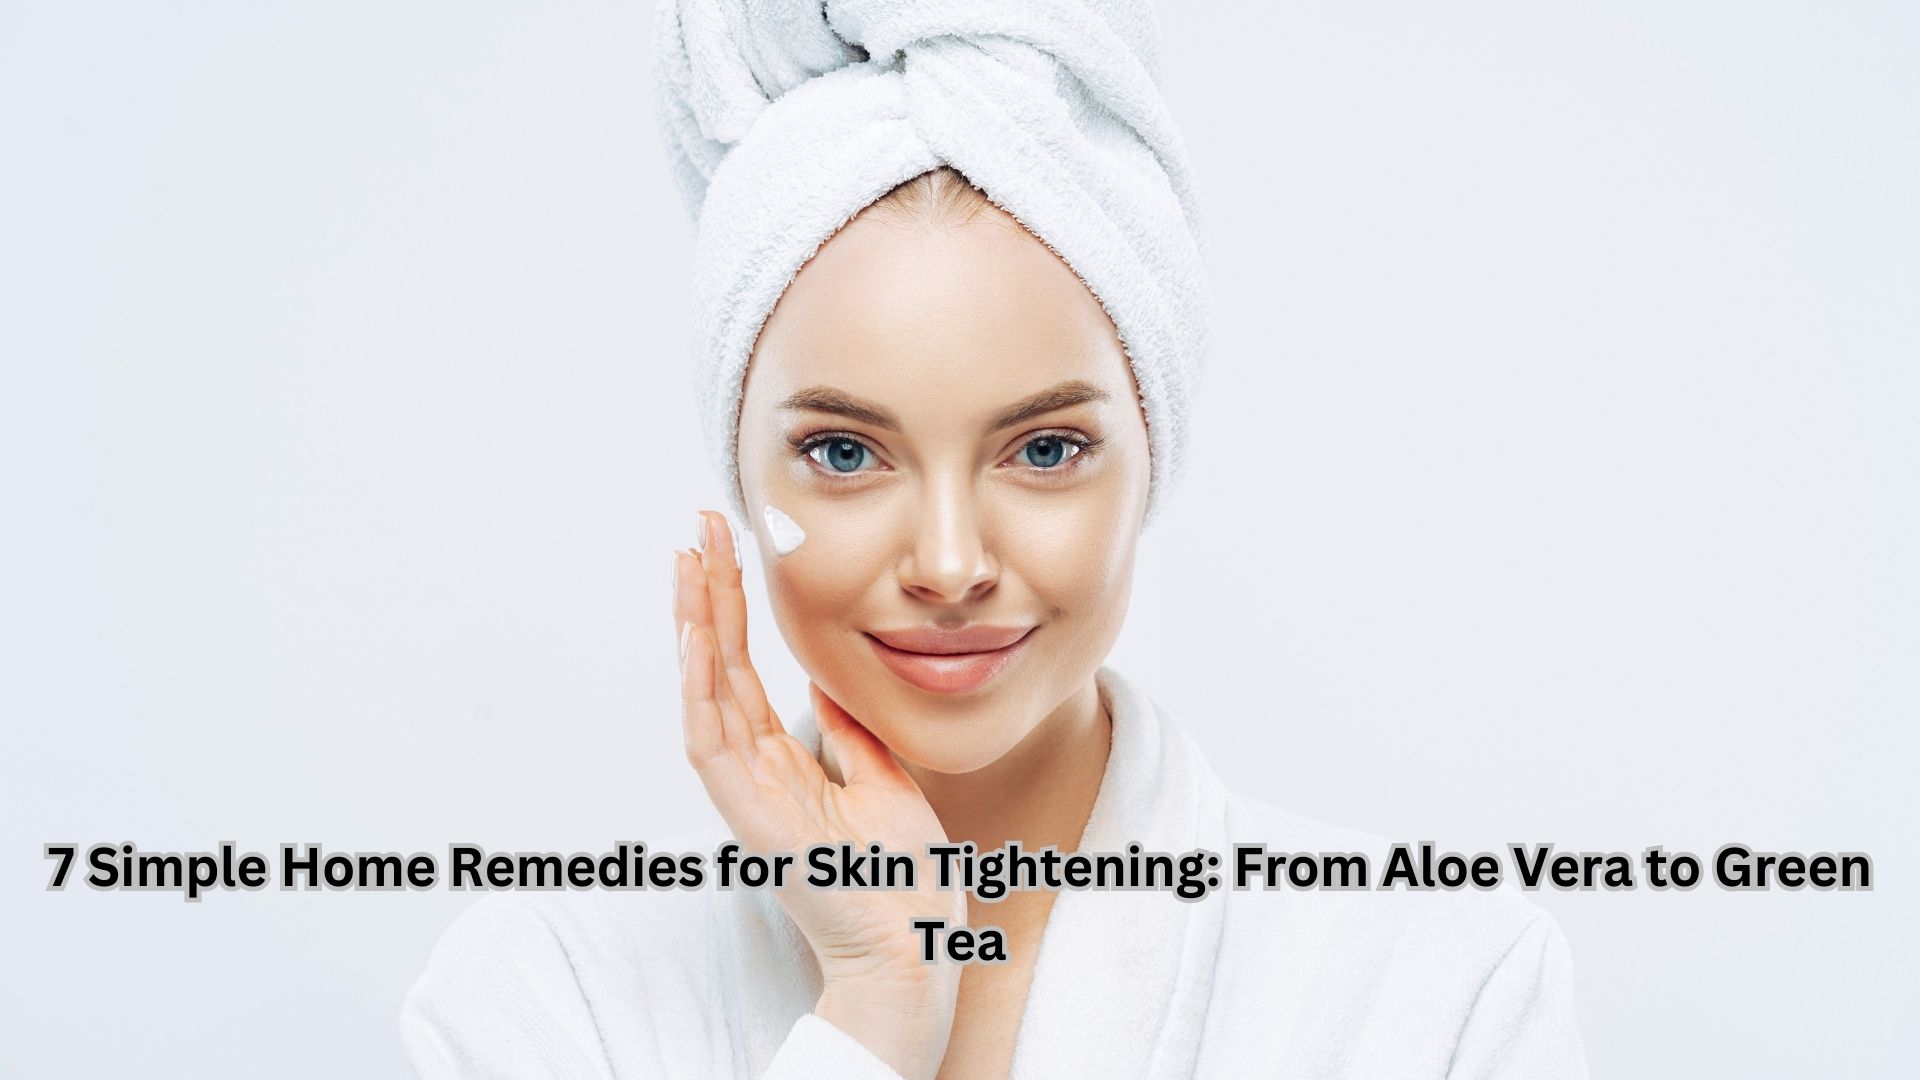 7 Simple Home Remedies for Skin Tightening: From Aloe Vera to Green Tea